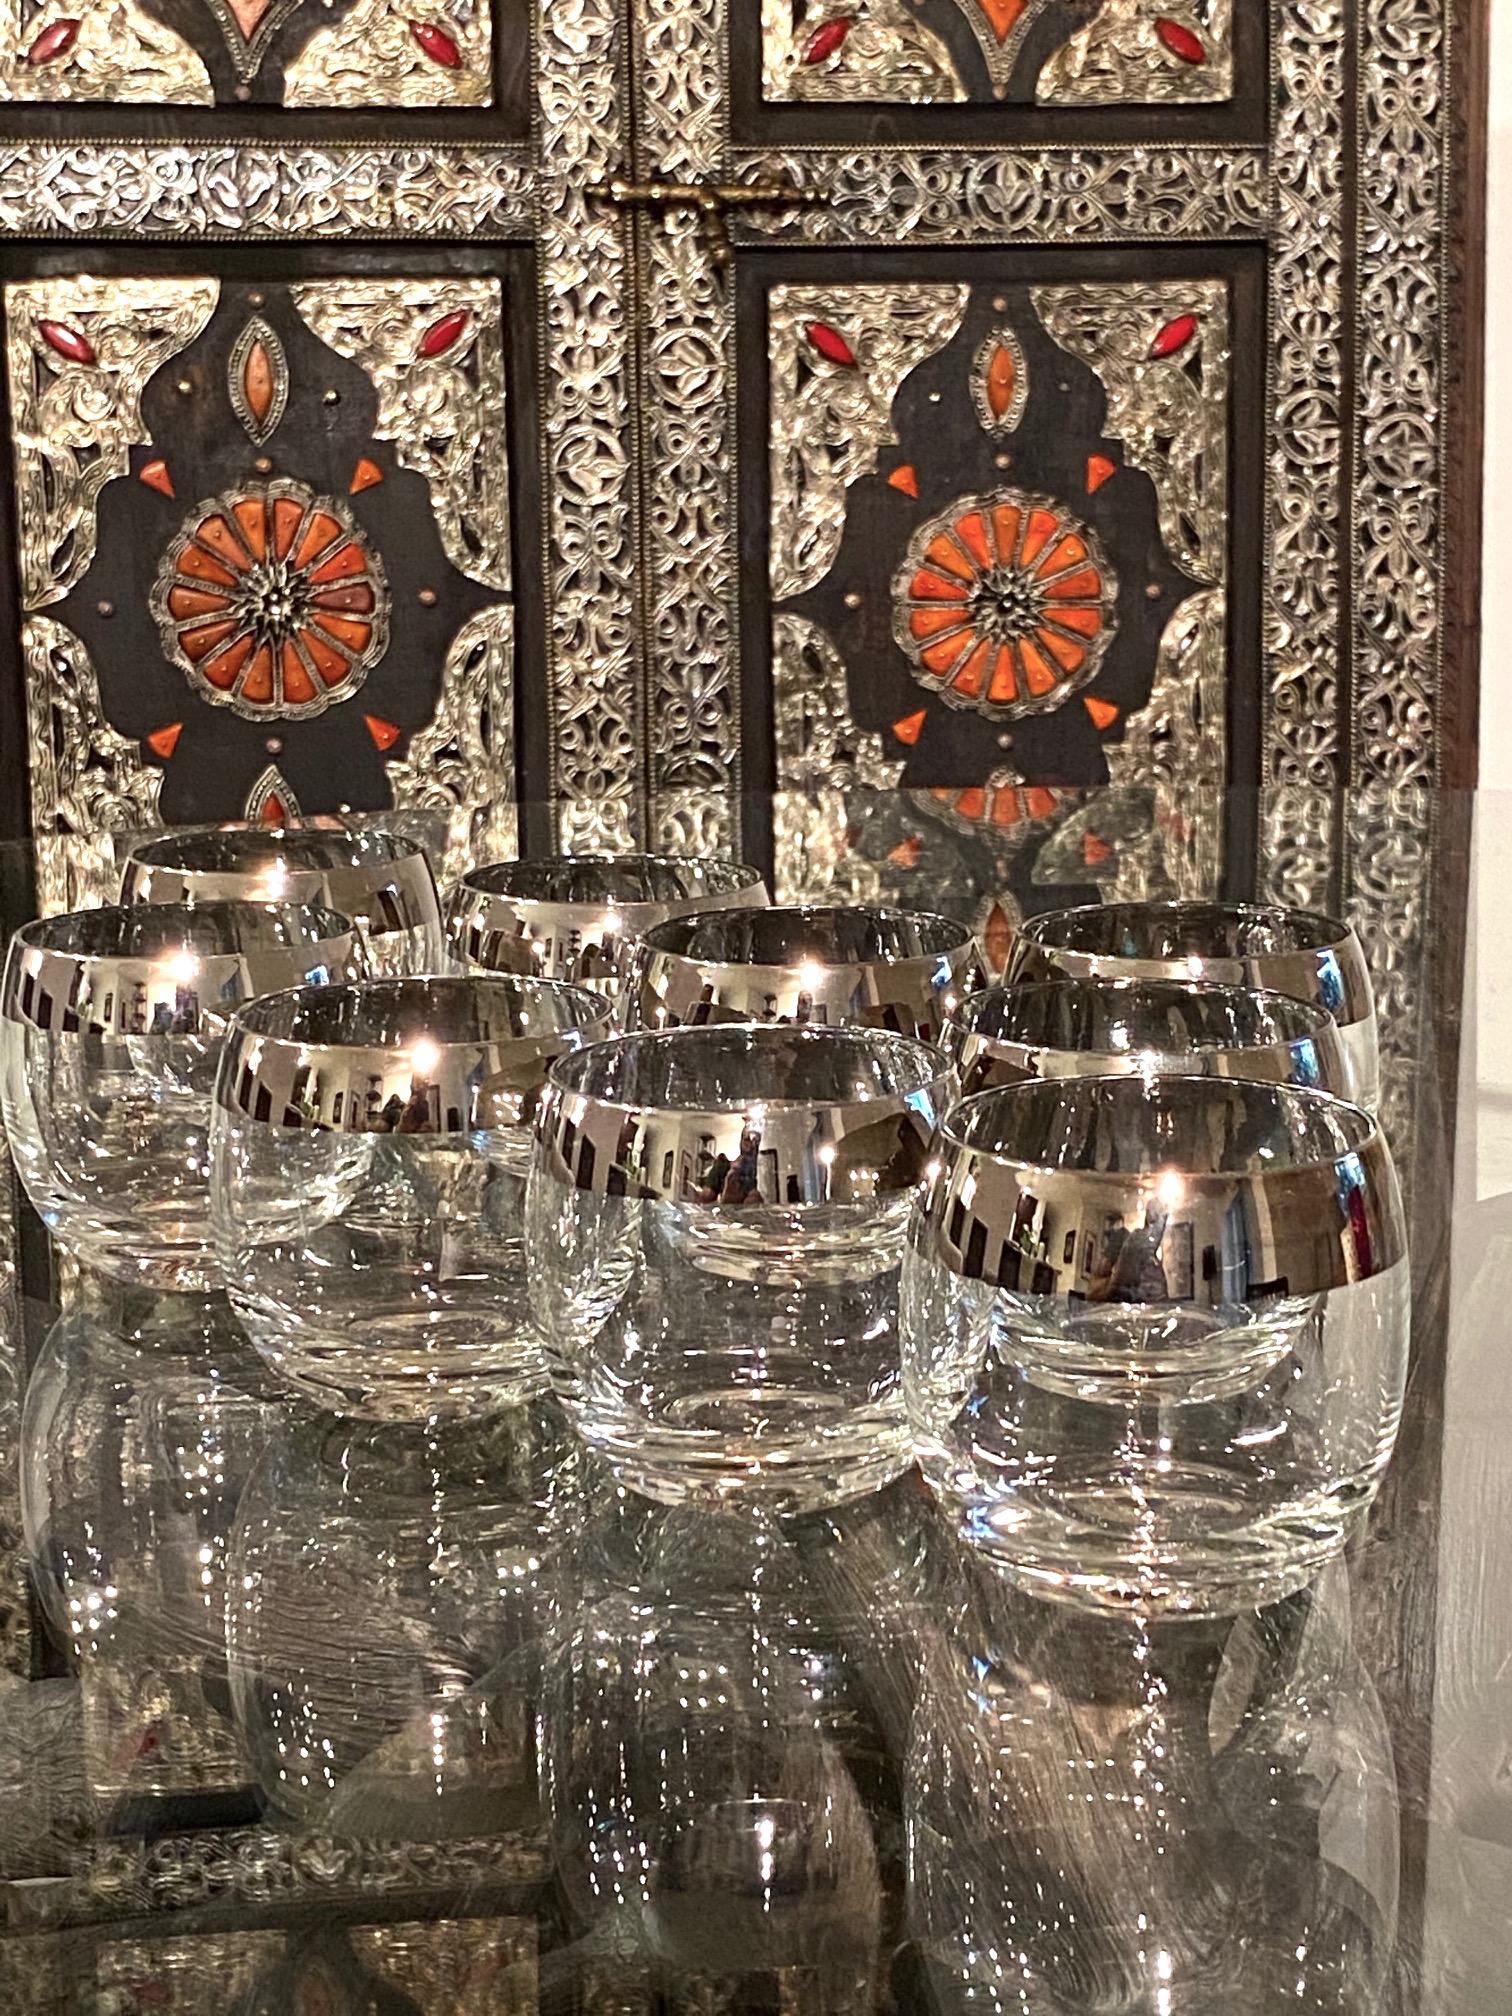 Set of nine vintage cocktail glasses designed by Dorothy Thorpe, known for her iconic Mid-Century Modern barware and glassware designs. The round glasses have a minimalist design with silver overlay rims. The large whiskey glasses are often referred